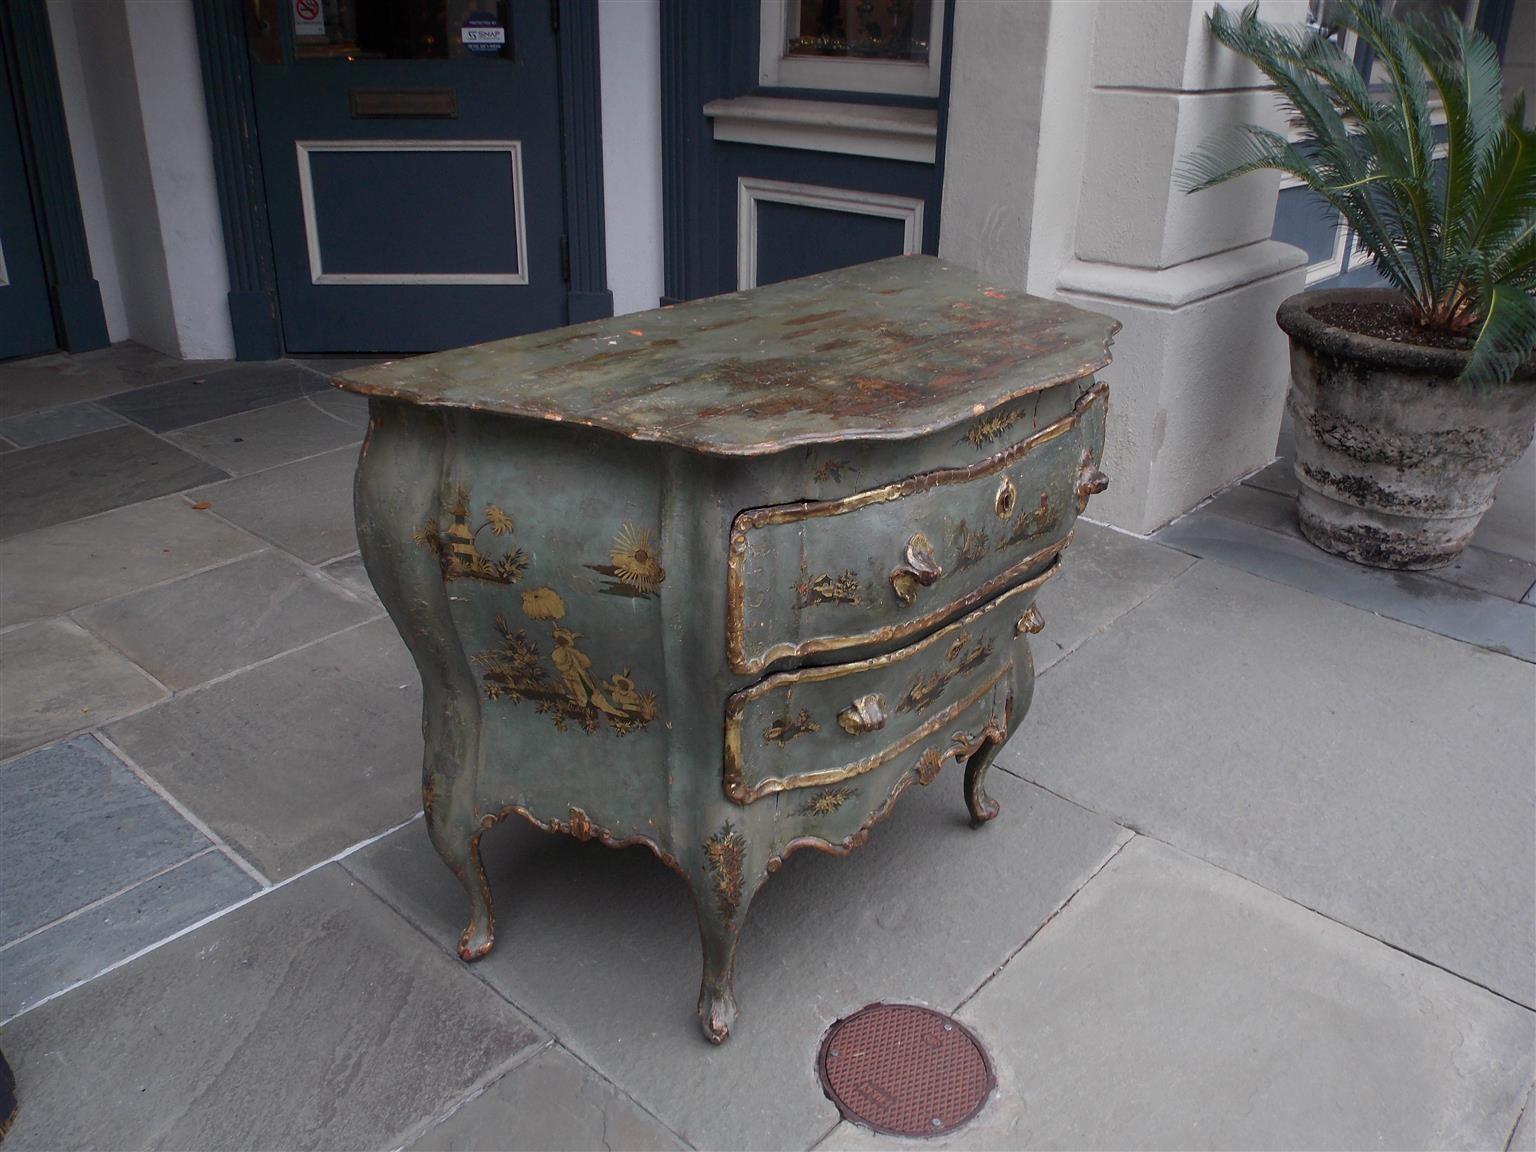 Venetian hand painted and gilt figural pagoda two-drawer commode with scalloped edge top, gilt carved shell form handles, and resting on a scalloped edge skirt with the original cabriole legs, Late 18th century.